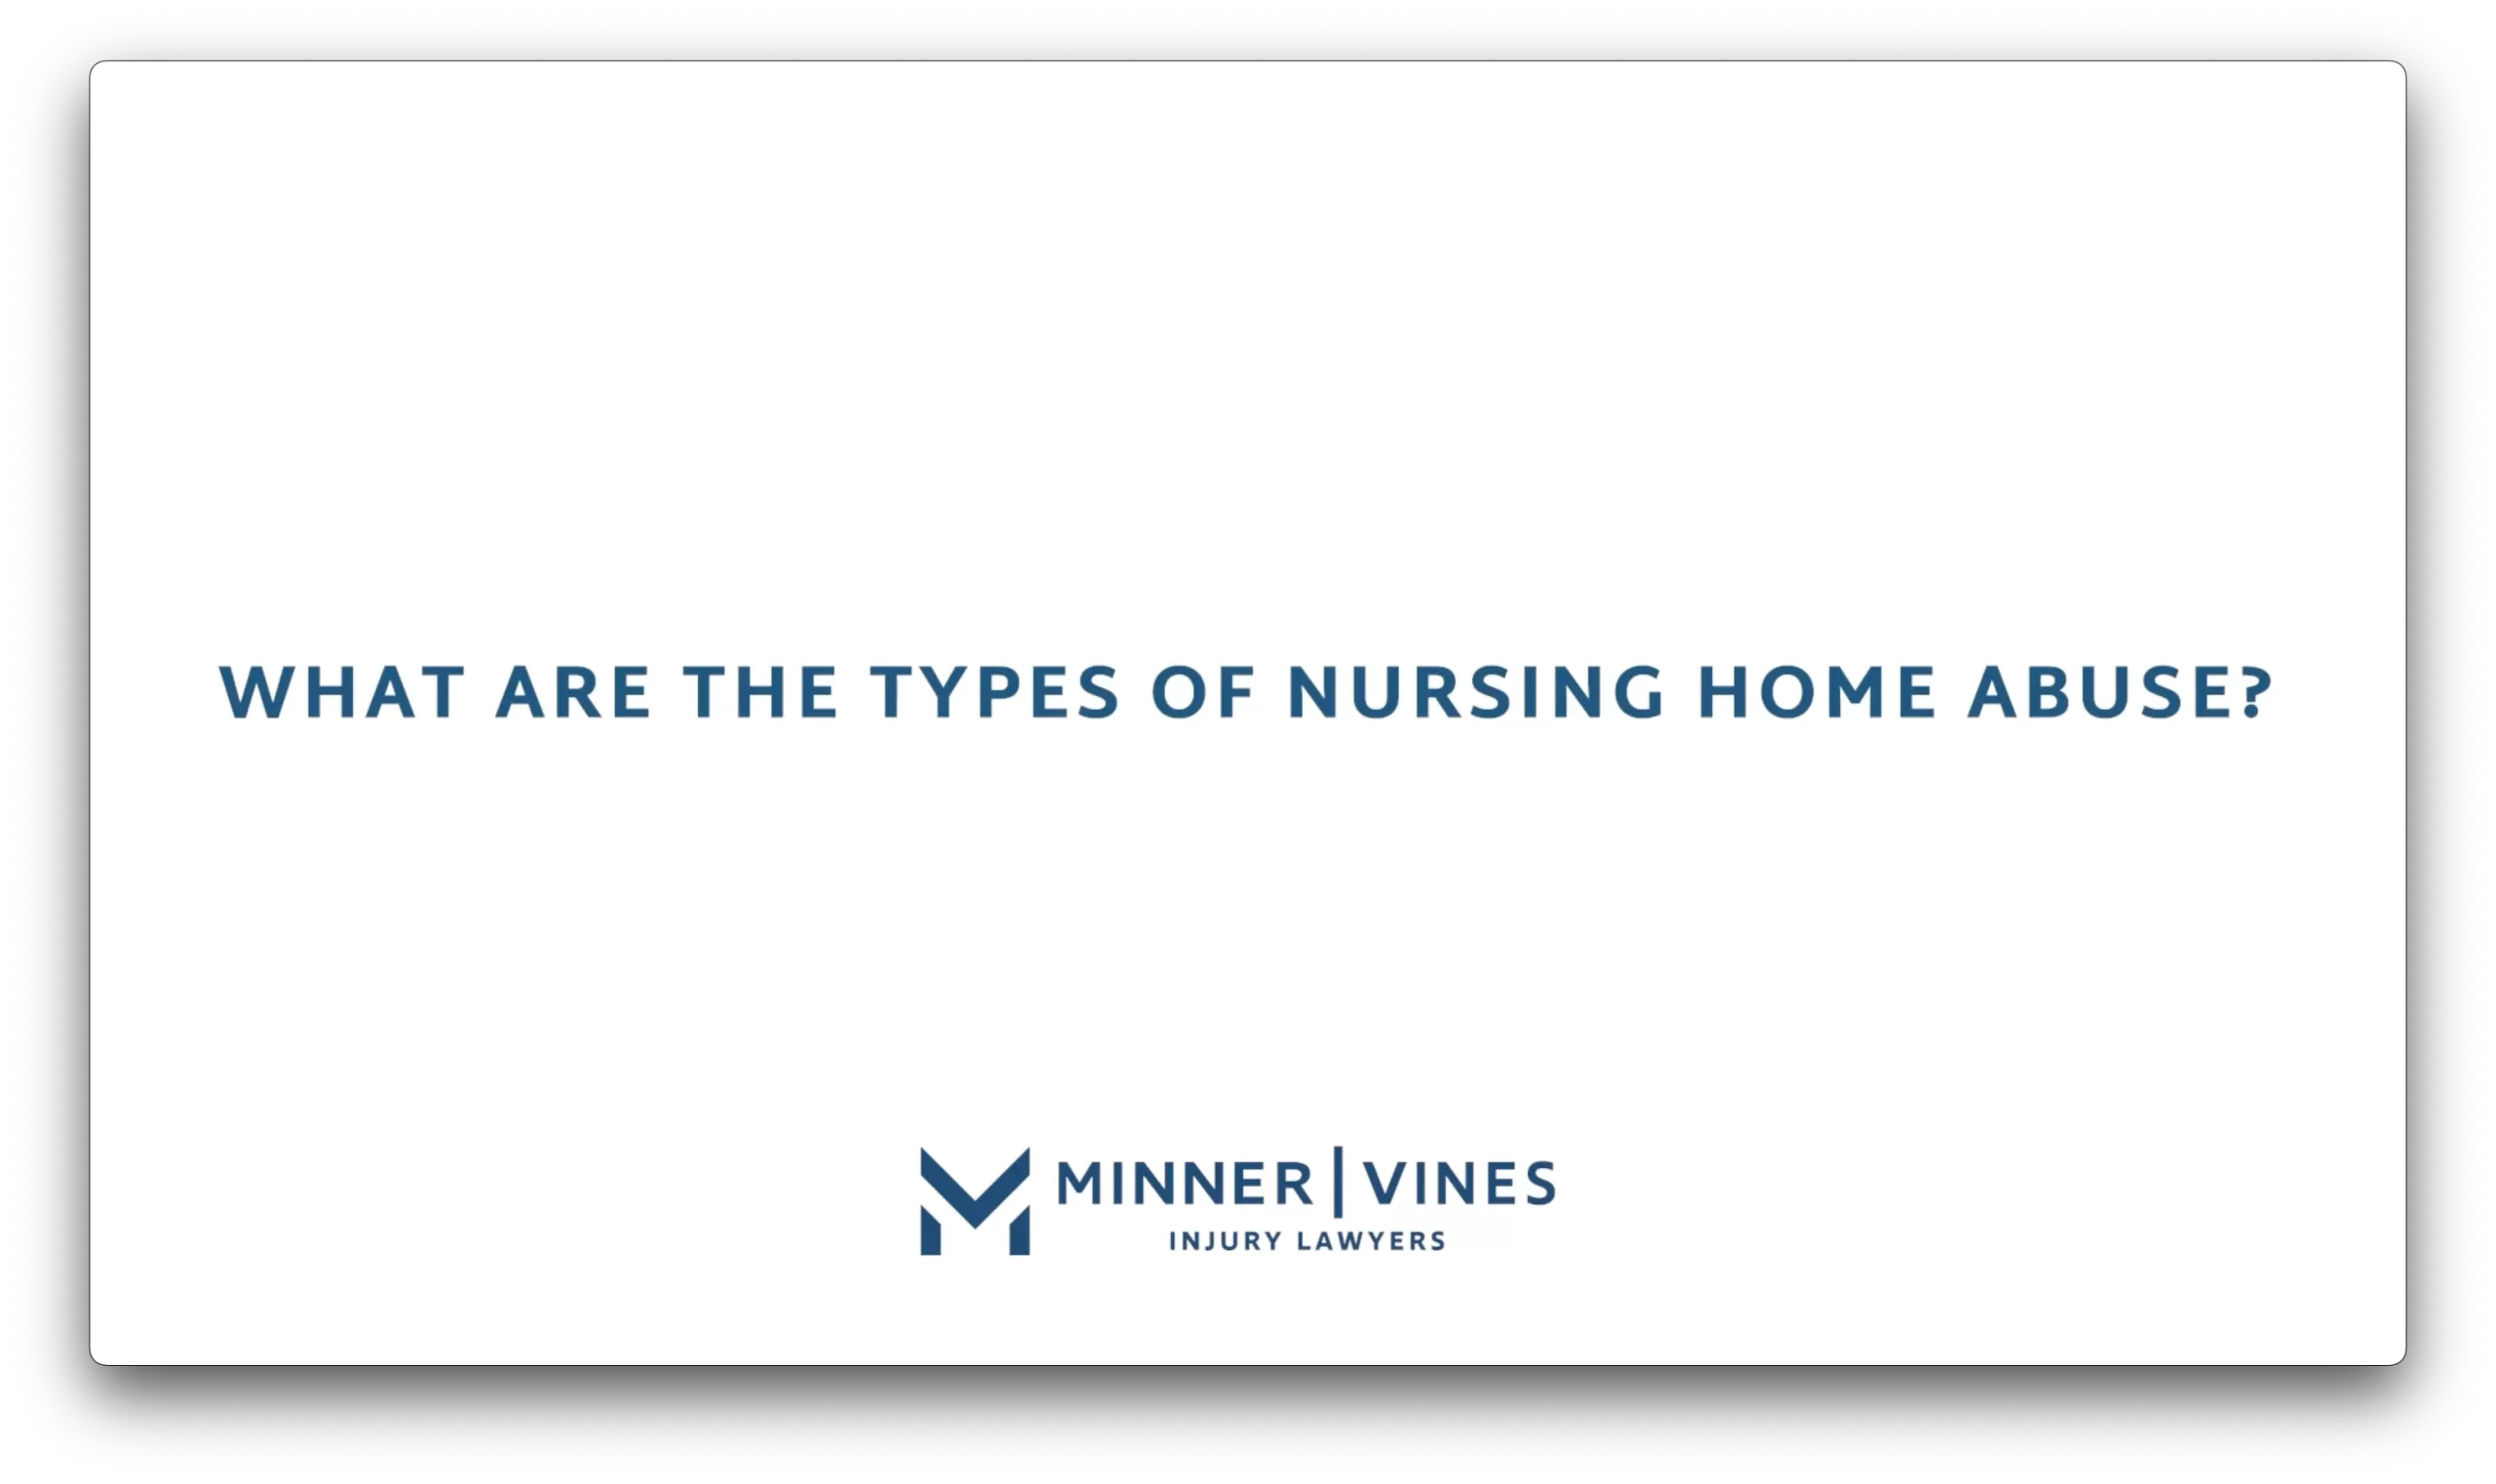 What are the types of nursing home abuse?